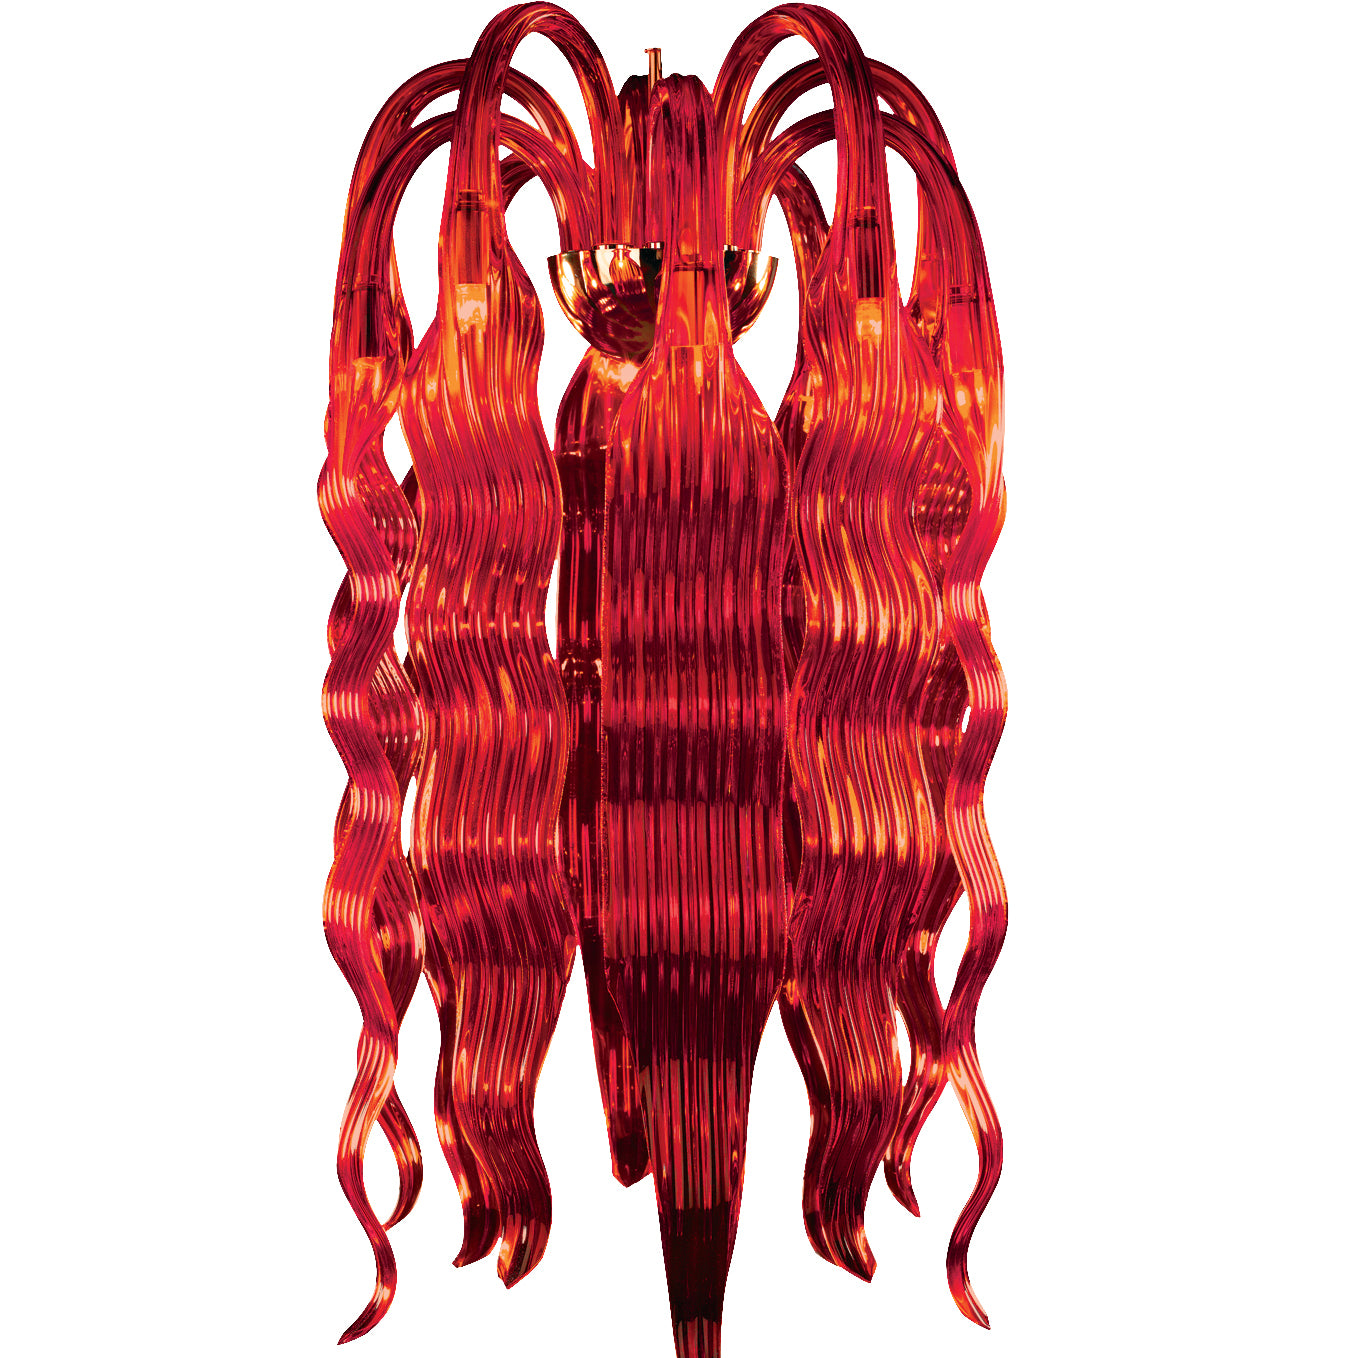 Flame chandelier3